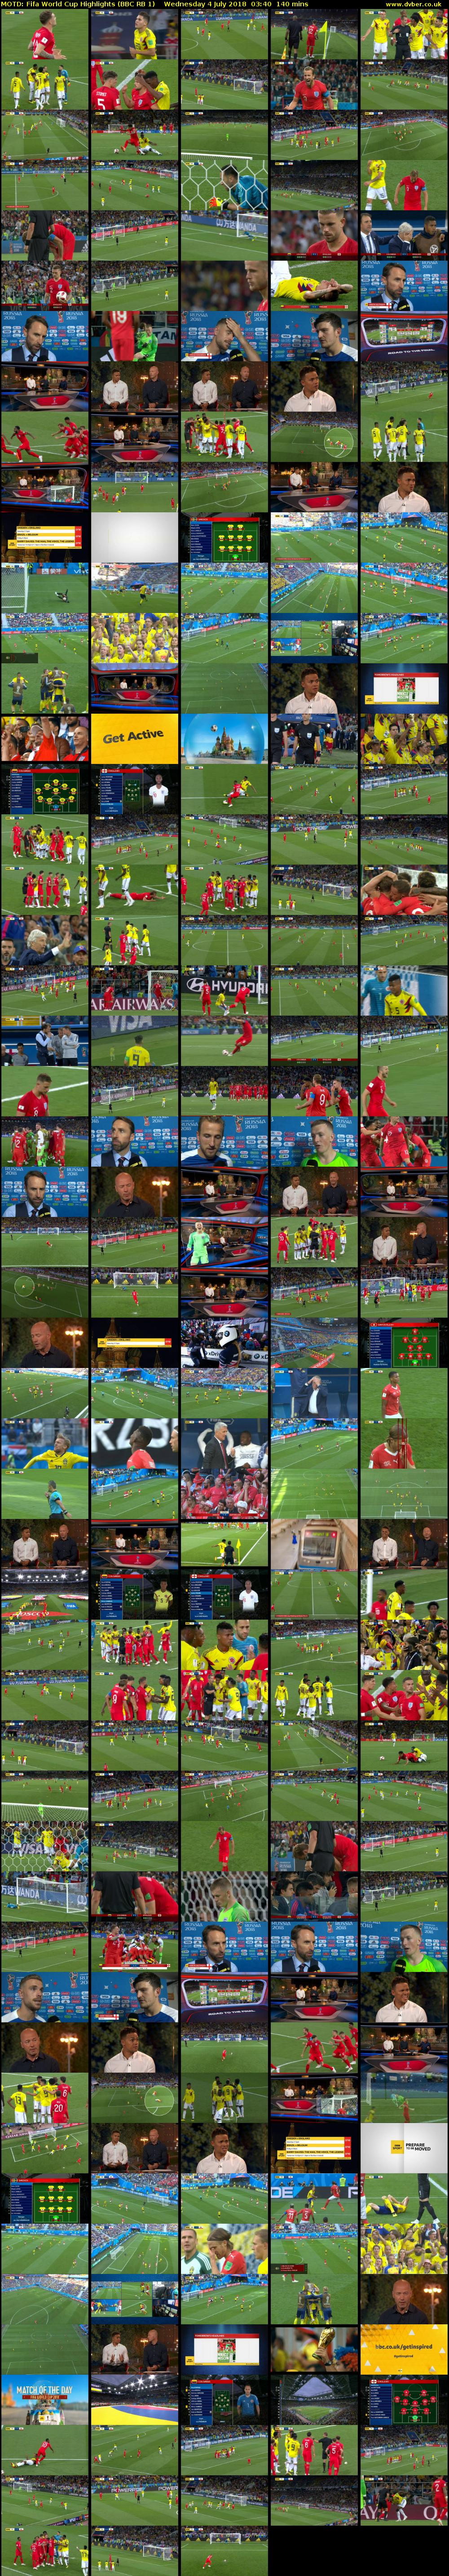 MOTD: Fifa World Cup Highlights (BBC RB 1) Wednesday 4 July 2018 03:40 - 06:00